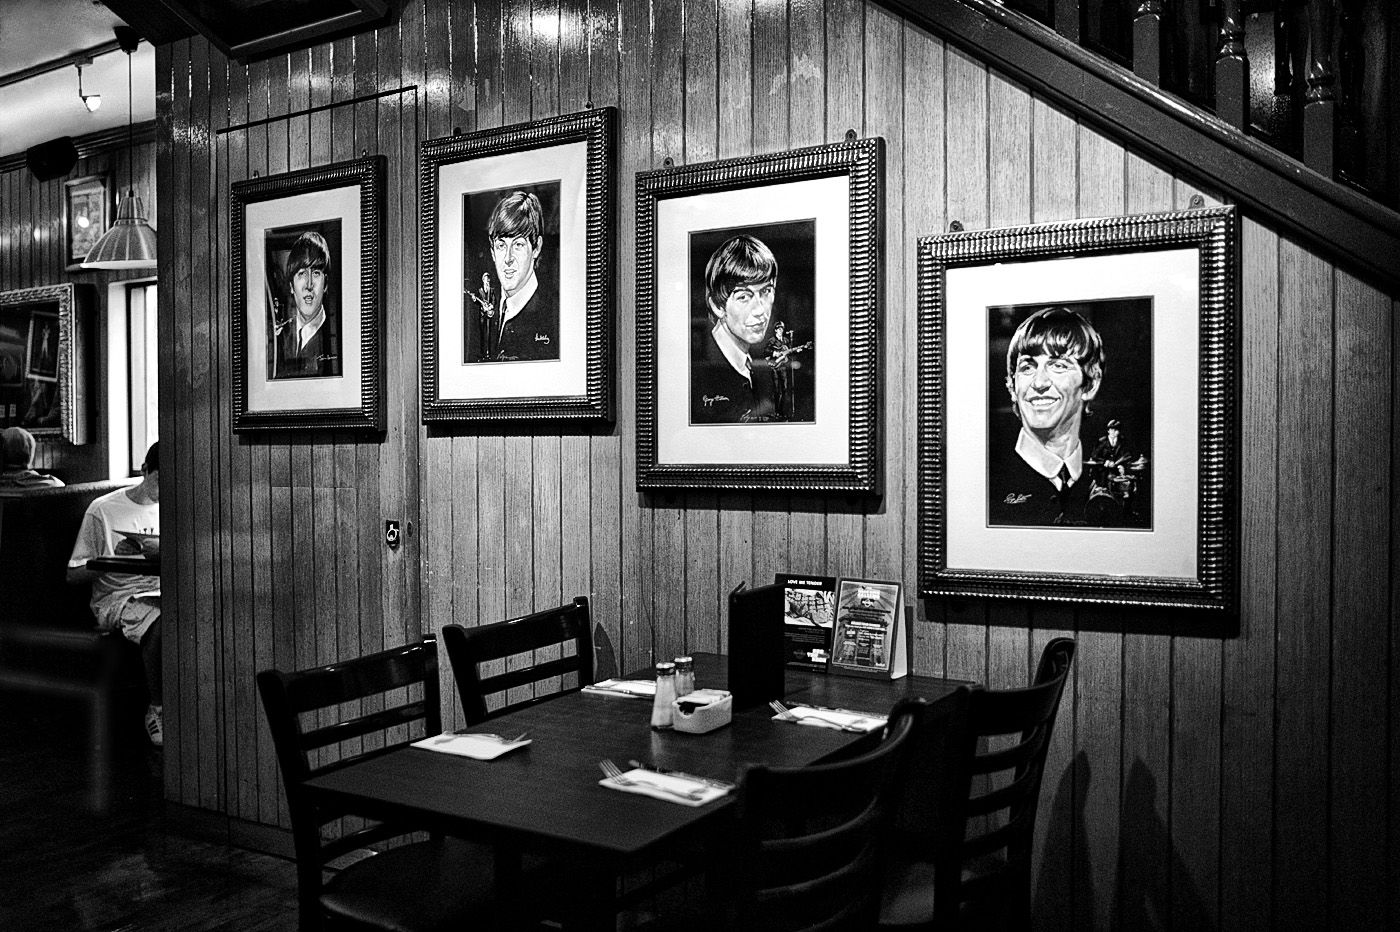 The Beatles Portraits at the Hard Rock Cafe